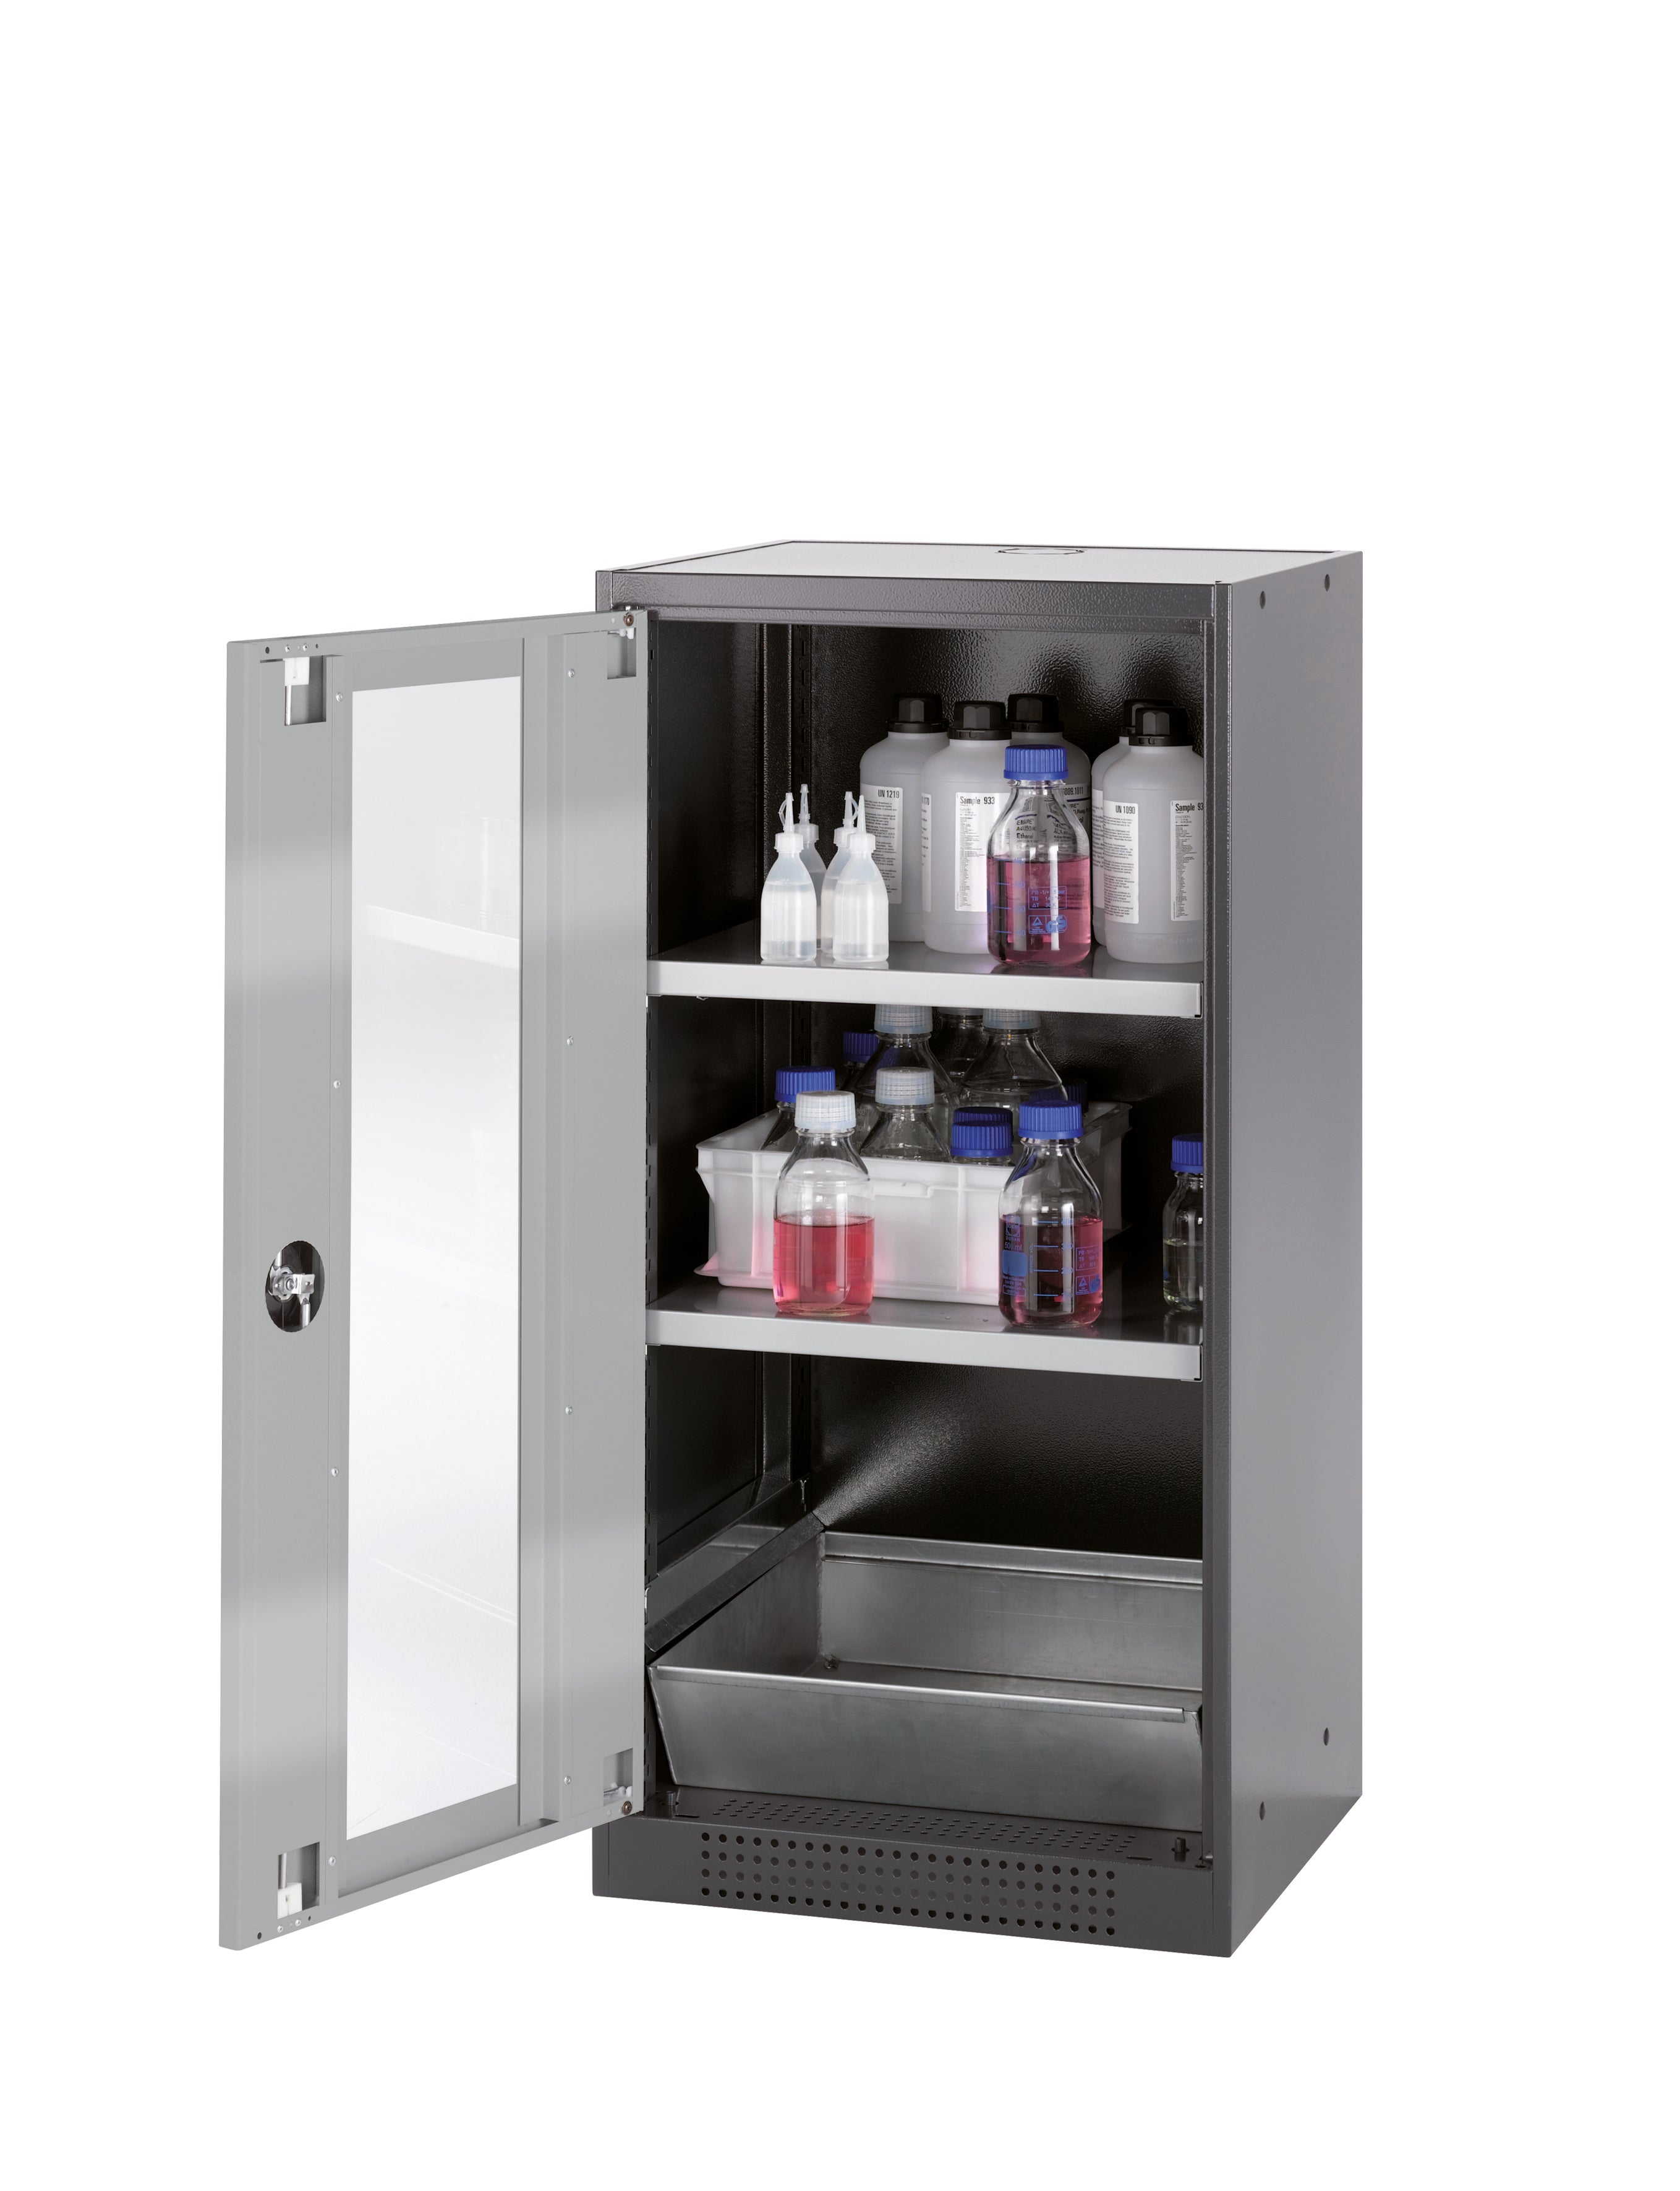 Chemical cabinet CS-CLASSIC-G model CS.110.054.WDFW in asecos silver with 2x standard shelves (sheet steel)